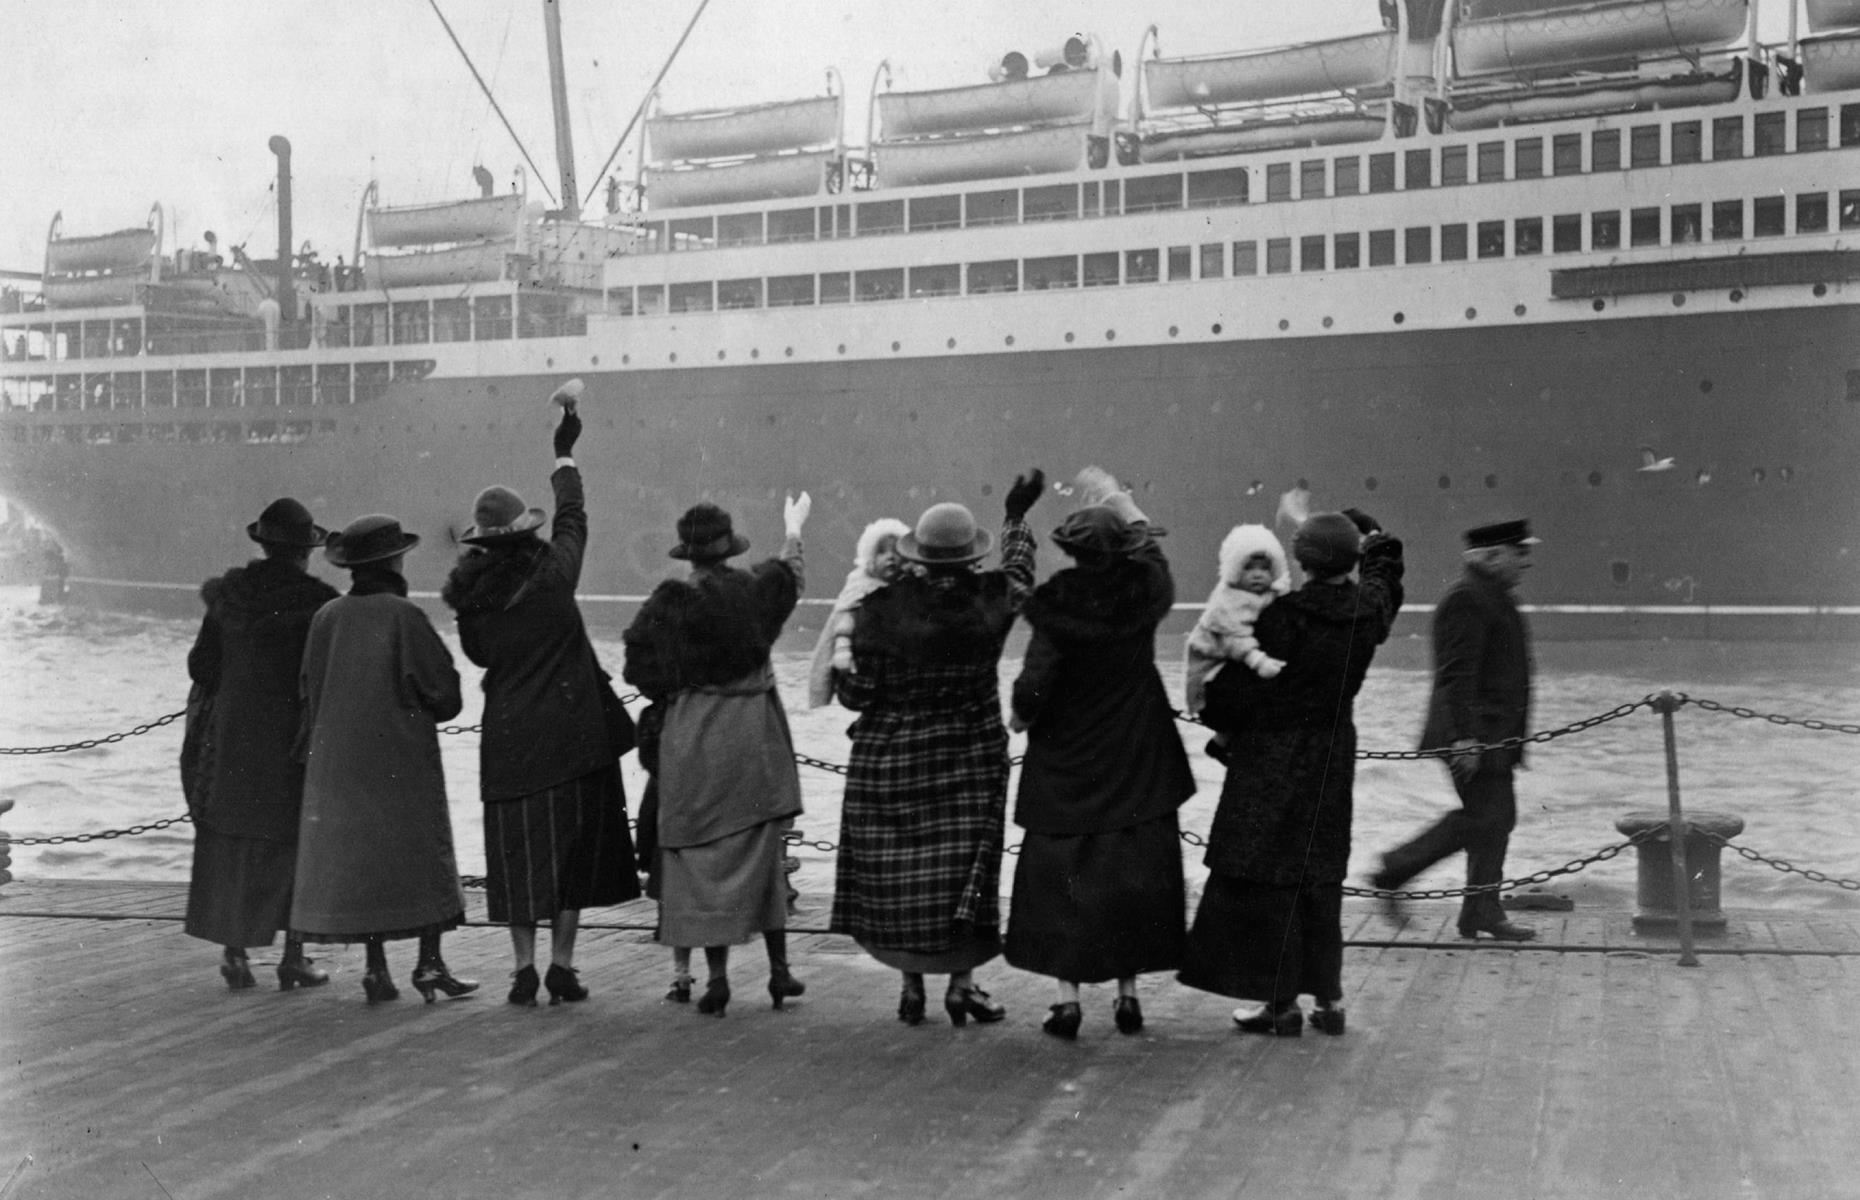 <p>Another major milestone came in the 1920s: the very first round-the-world cruise. The Cunard Line's RMS Laconia (pictured here leaving Liverpool circa 1920) sailed around the globe in 1922, calling at 22 ports along the way, and taking 450 lucky passengers with her.</p>  <p><a href="https://www.loveexploring.com/galleries/86315/how-air-travel-has-changed-in-every-decade-from-the-1920s-to-today"><strong>See how air travel has changed through the decades</strong></a></p>